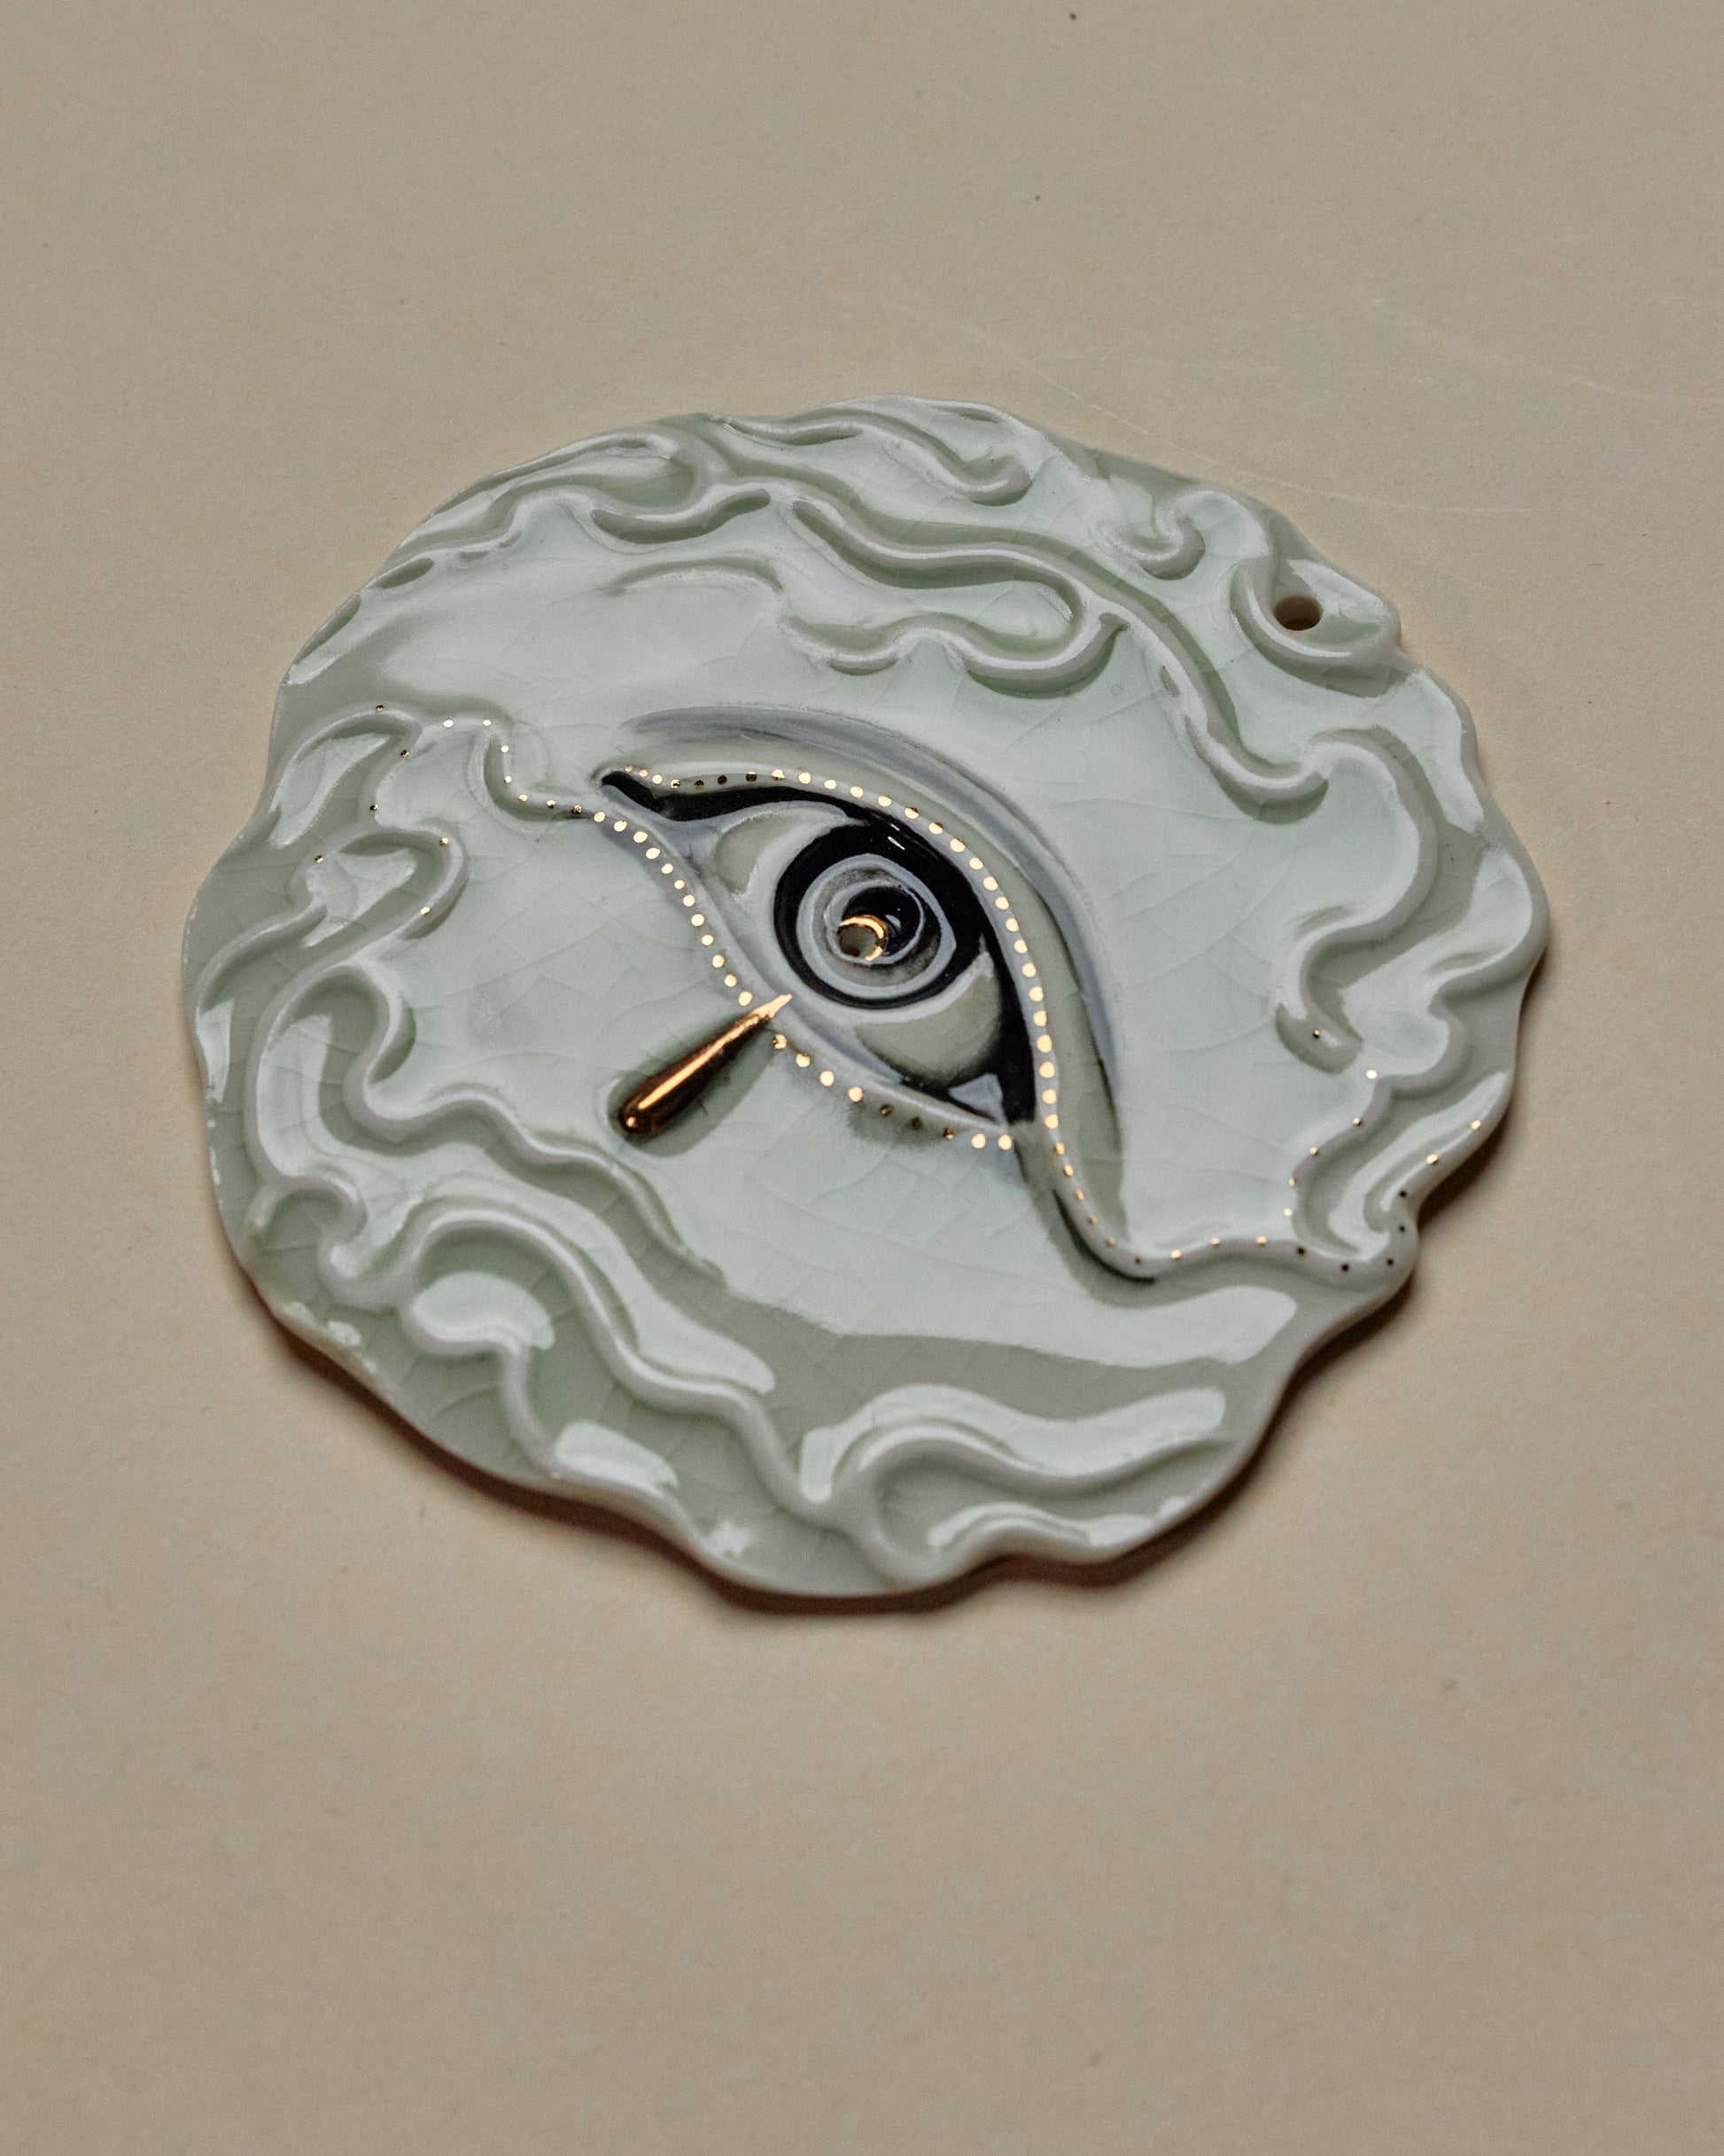 Flaming Eye Incense Holder / Wall Ornament 2 -  Hand crafted Porcelain Home Ornament. Circular ornament with Eye and Flame Border.